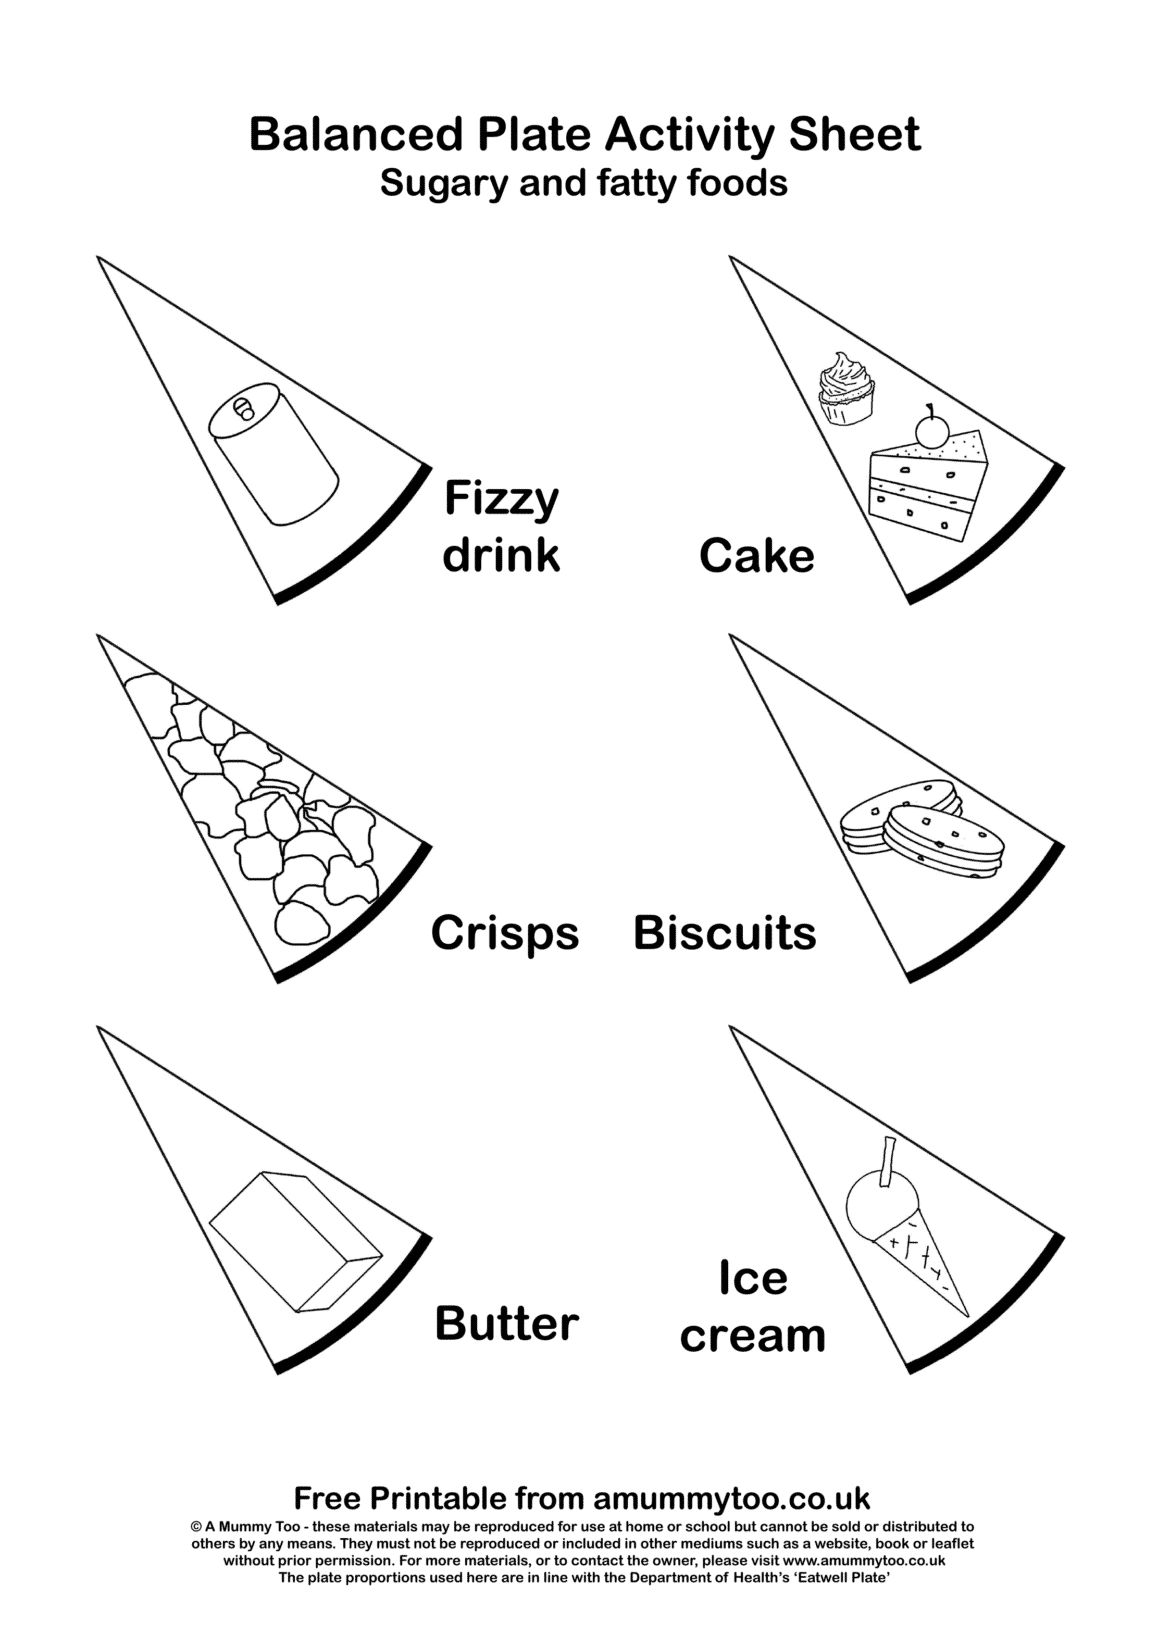 Balanced plate black and white activity sheet showing different sugary and fatty foods which should make up the smallest amount of a plate. 